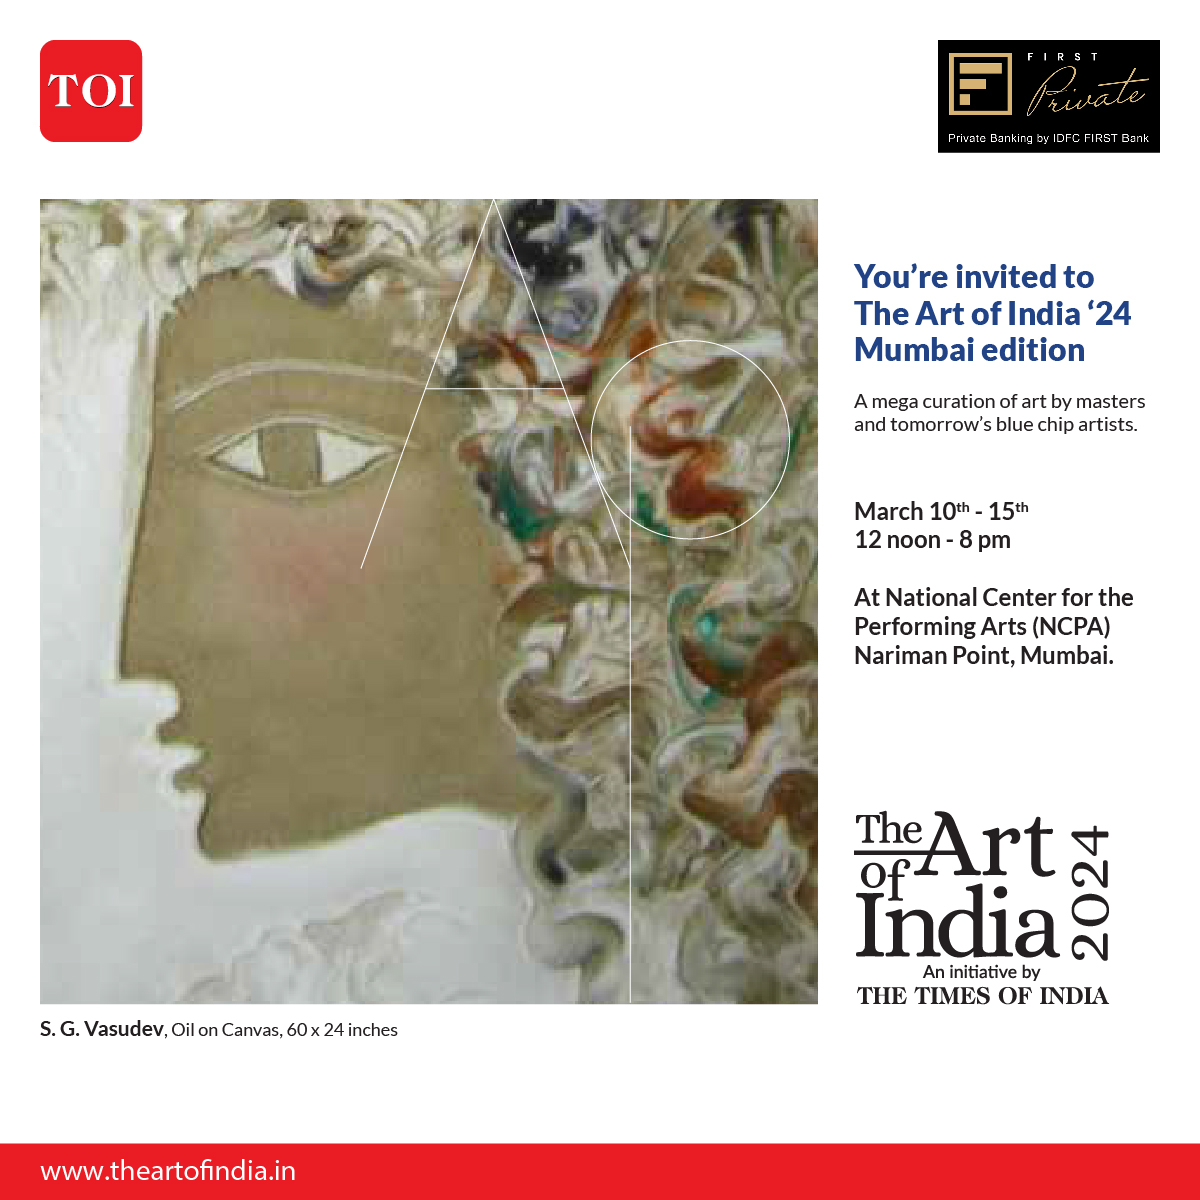 Explore the mesmerizing works of SG Vasudev, Ananda Moy Banerji, Padma Reddy, and Mainaz Bano. 

From 12 noon to 8 pm only at the National Center for the Performing Arts (NCPA), Nariman Point, Mumbai.

#IDFCFIRSTBank #AlwaysYouFirst #IDFCFIRSTPrivate #TheArtOfIndia2024 #TOI